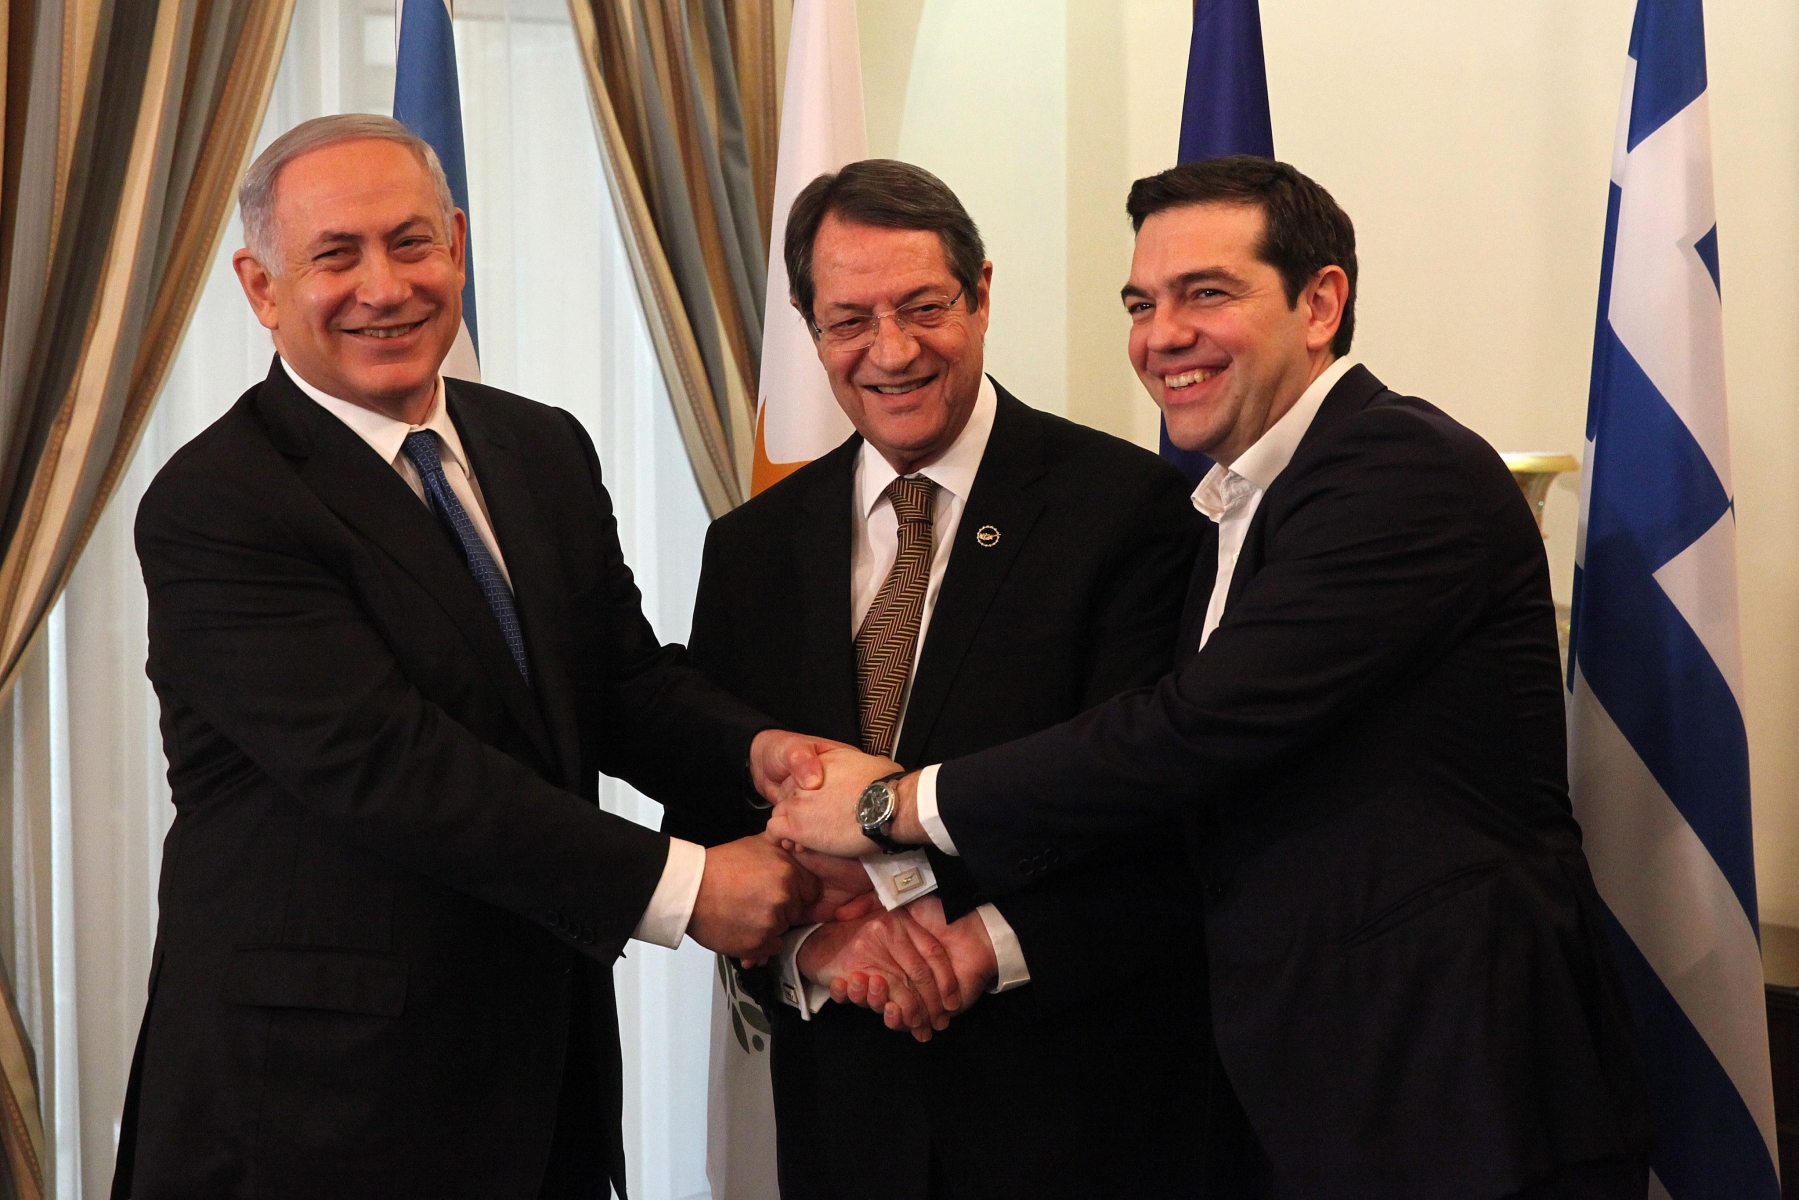 epa05131344 President of Cyprus Nikos Anastasiades (C), Israeli Prime Minister Benjamin Netanyahu (L) and Greek Prime Minister Alexis Tsipras (R) shake hands during their meeting at the Presidential Palace in Nicosia, Cyprus, 28 January 2016. Cyprus-Greece-Israel tripartite economic relations meeting on shipping, tourism and energy in Nicosia, aimed at establishing greater cooperation in the eastern Mediterranean.  EPA/YIANNIS KOURTOGLOU / POOL